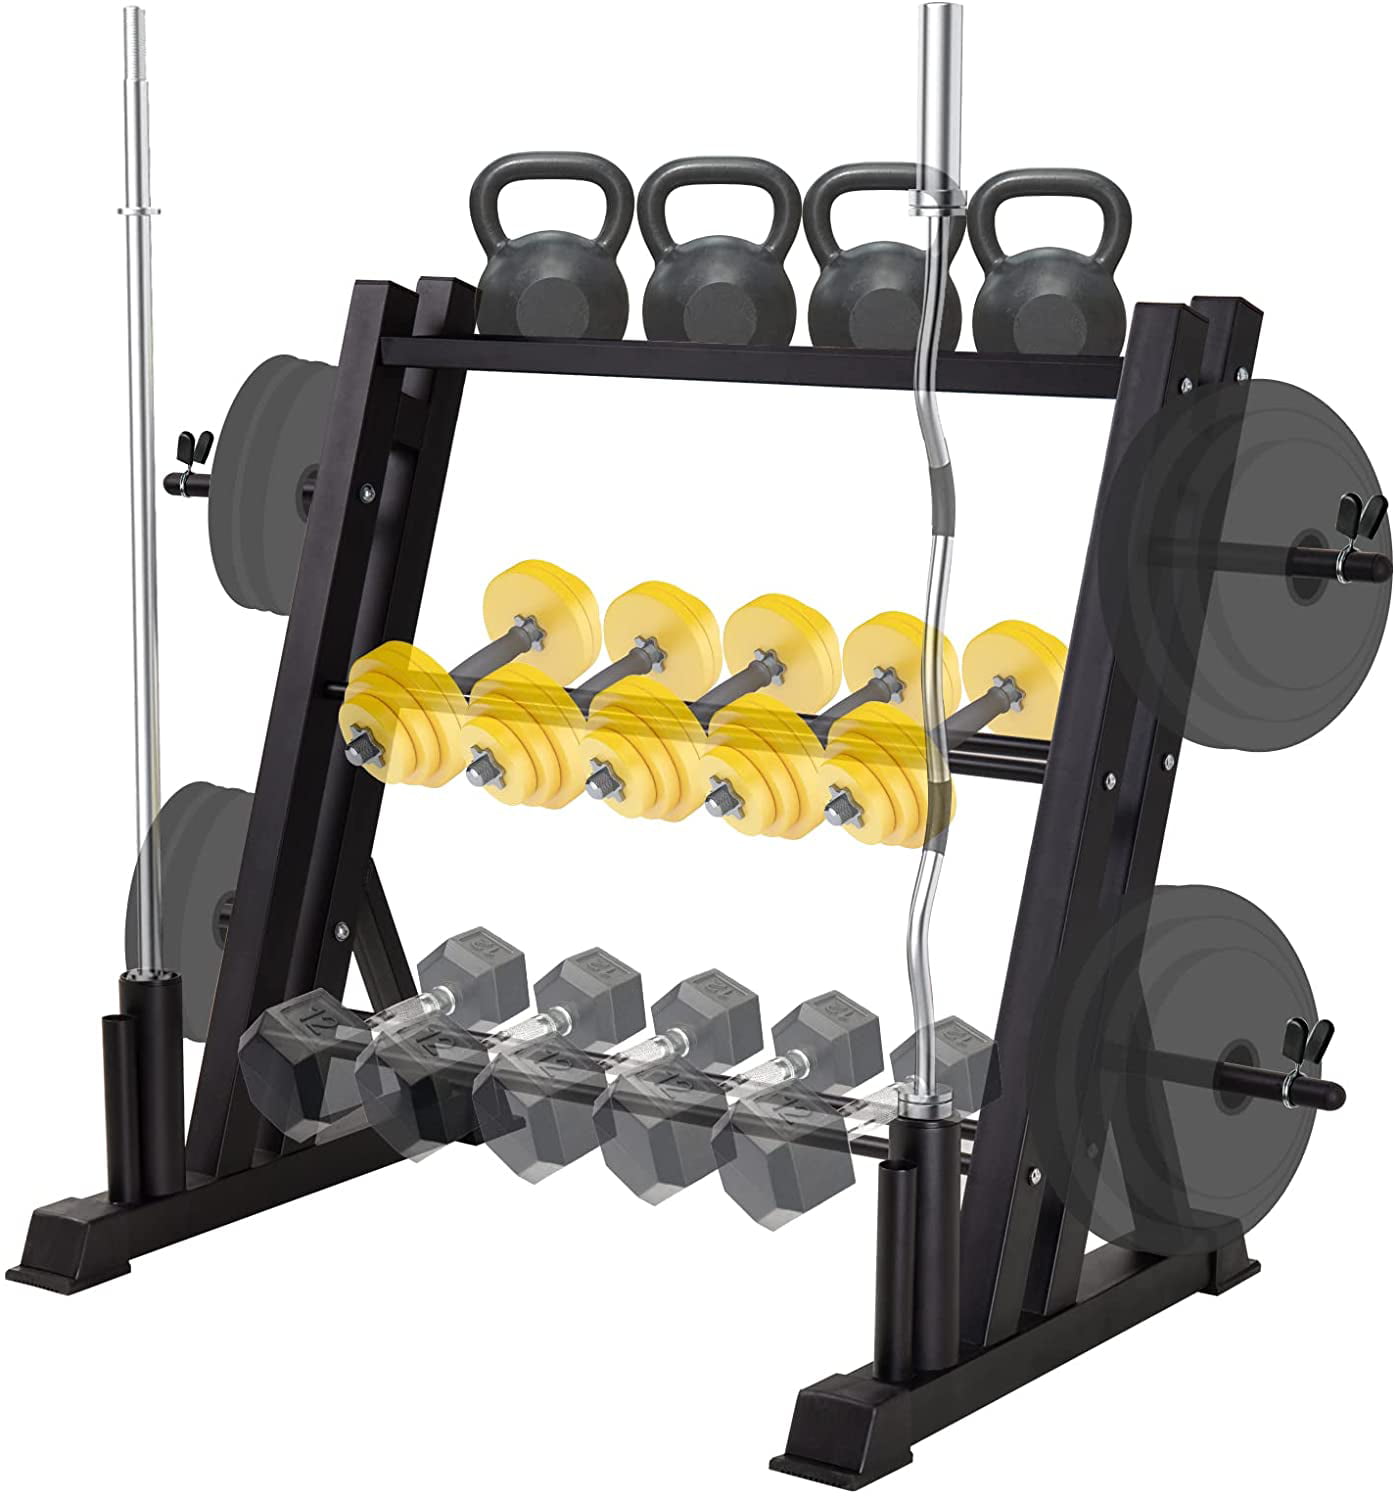 Color : Black Dumbbell Rack in Stock 1PC Portable 3-Layer Dumbbell Rack Home 2 Tier Dumbbell Holder Home Gym Exercise Weight Tower Durable Rack Stand Dumbbell Stand 